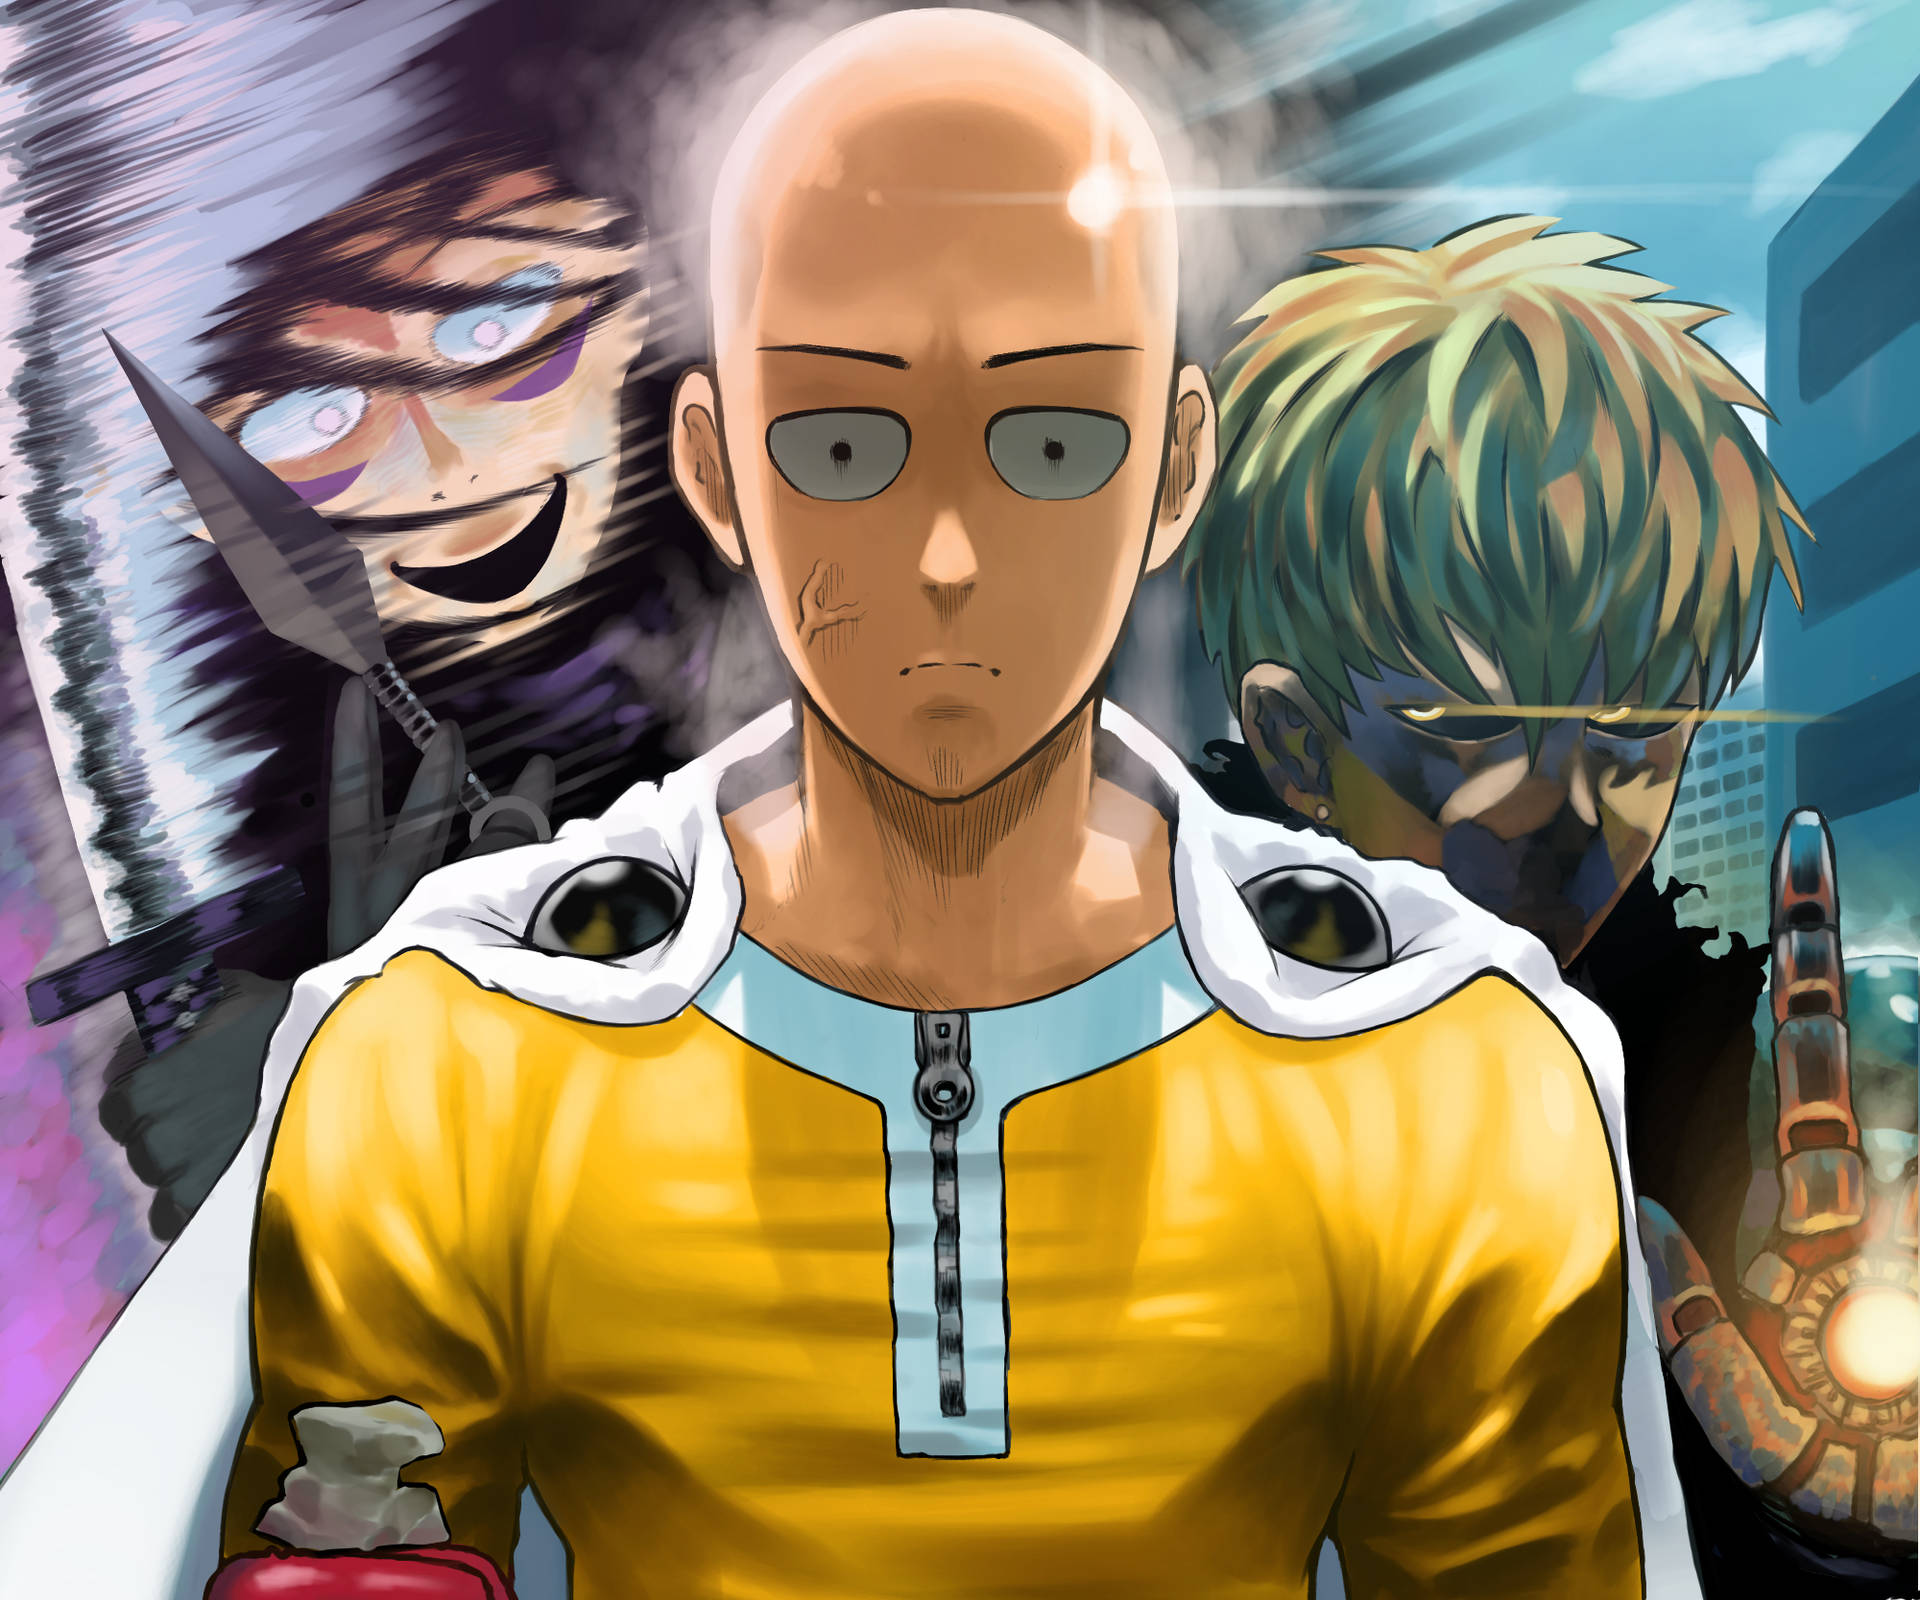 Two One Punch Man Anime Visuals Revealed - Haruhichan